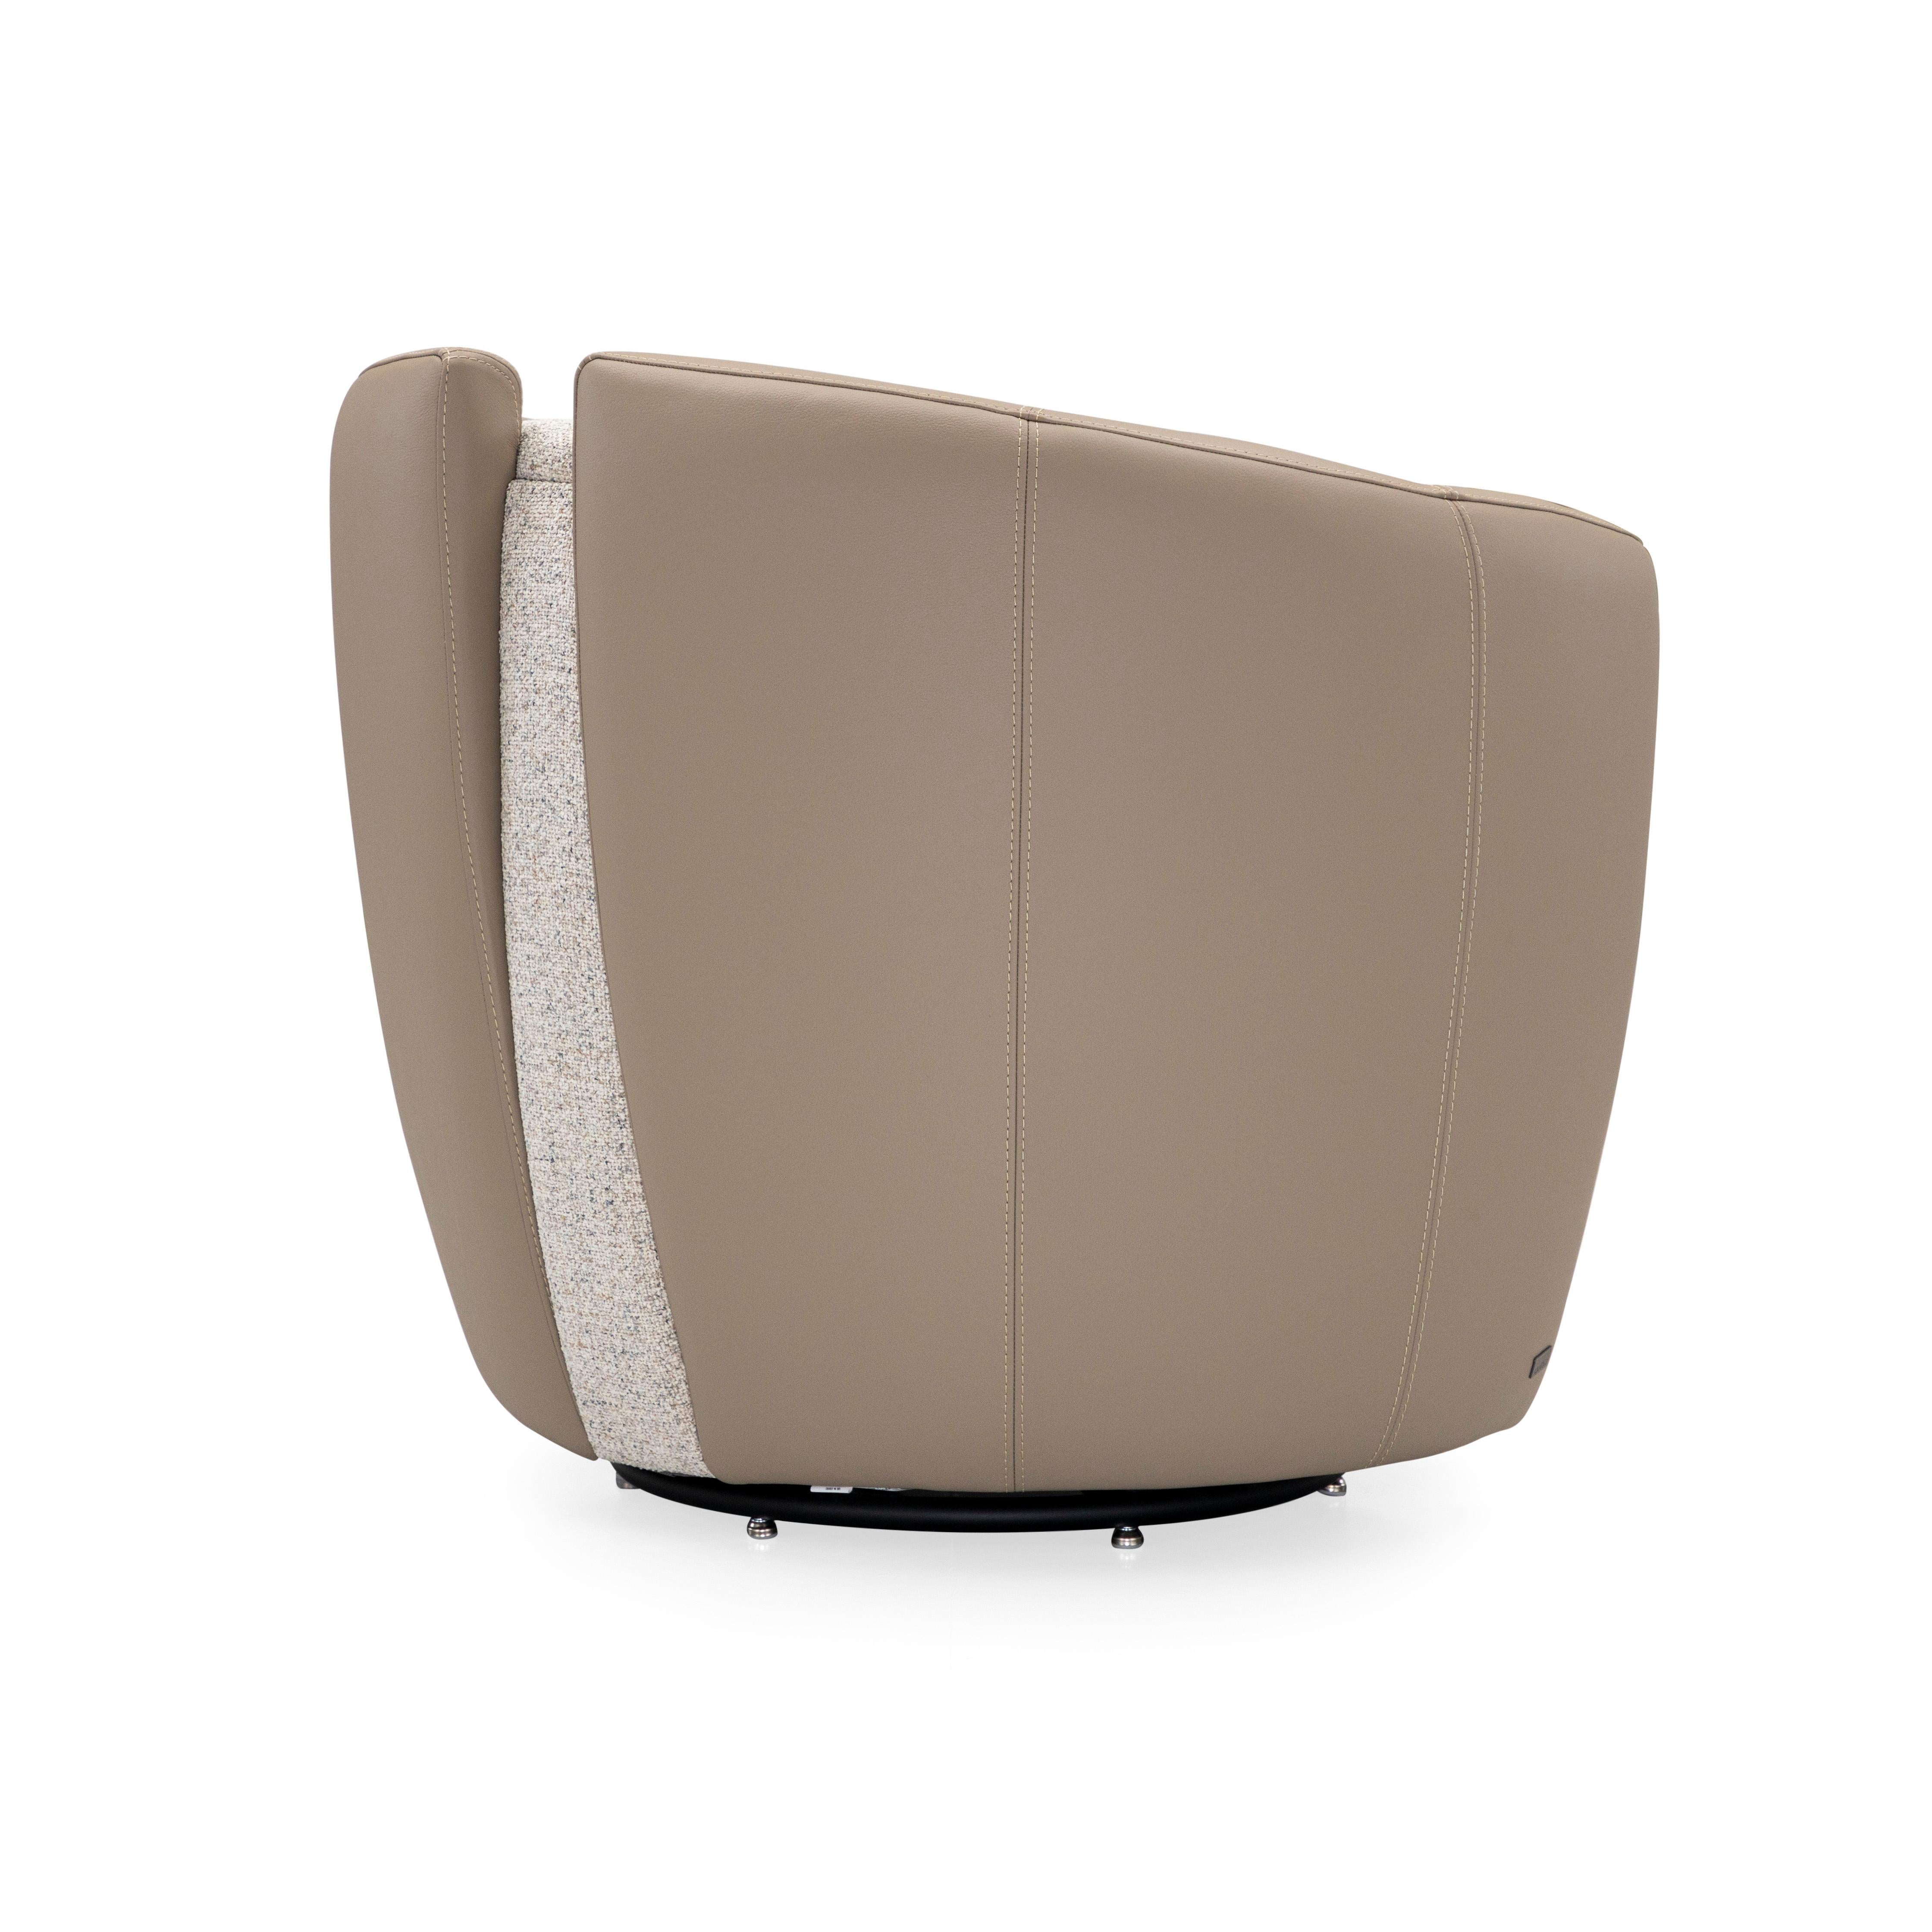 Lirio Contemporary Accent Chair in Cream Leather and Beige Boucle Fabric In New Condition For Sale In Miami, FL